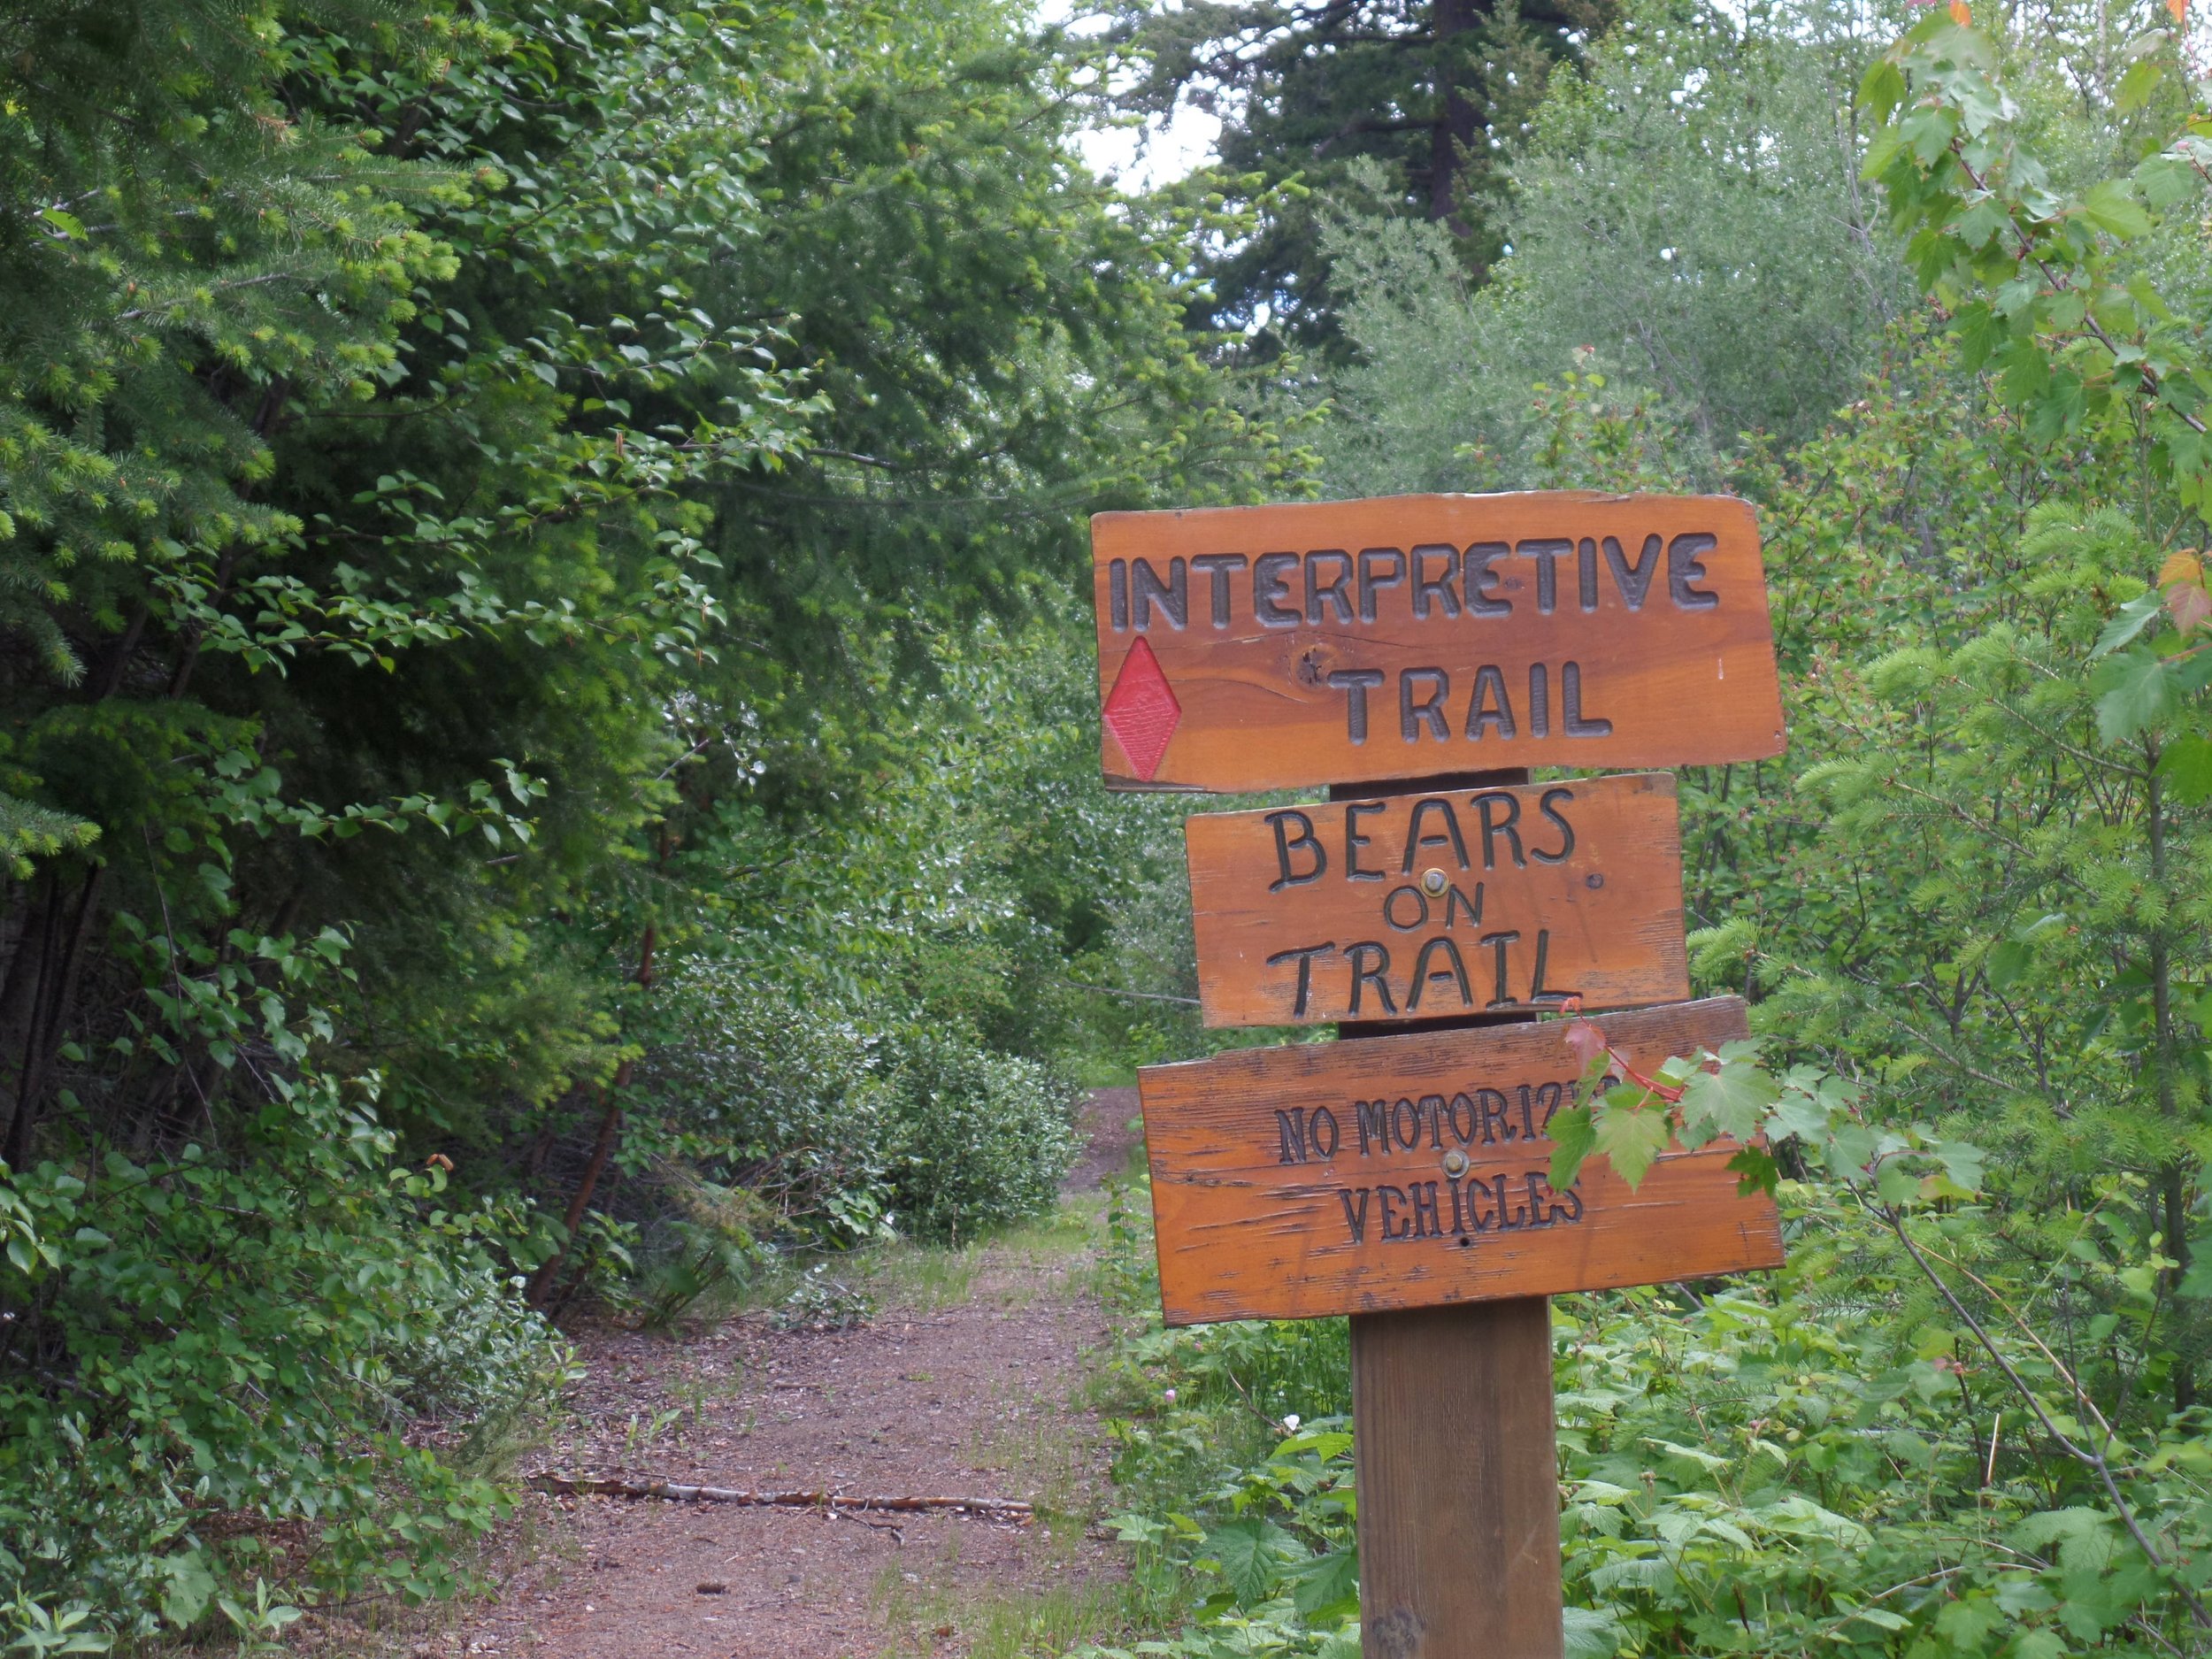  “Bears on Trail”, a sign located at the head of a popular recreational trail. 